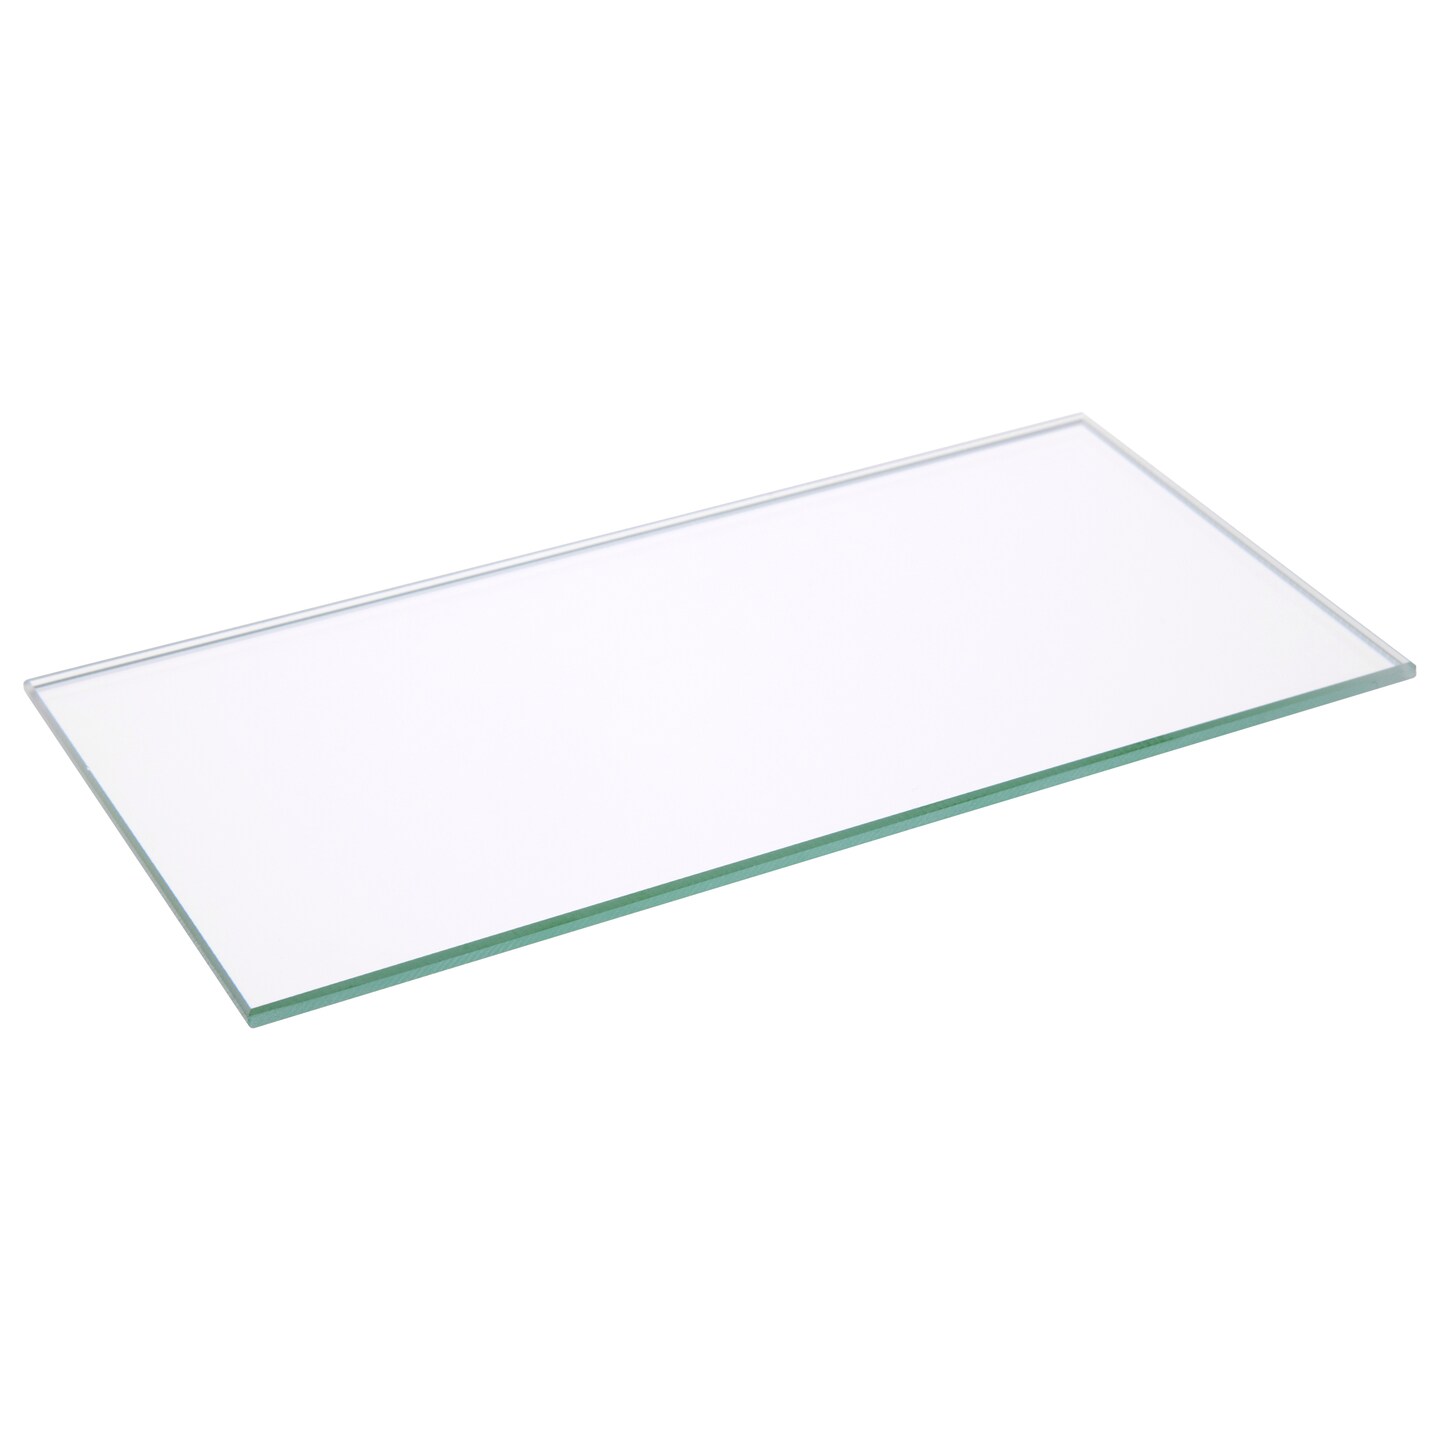 Plymor Rectangle 3mm Non-Beveled Glass Mirror, 3 inch x 6 inch